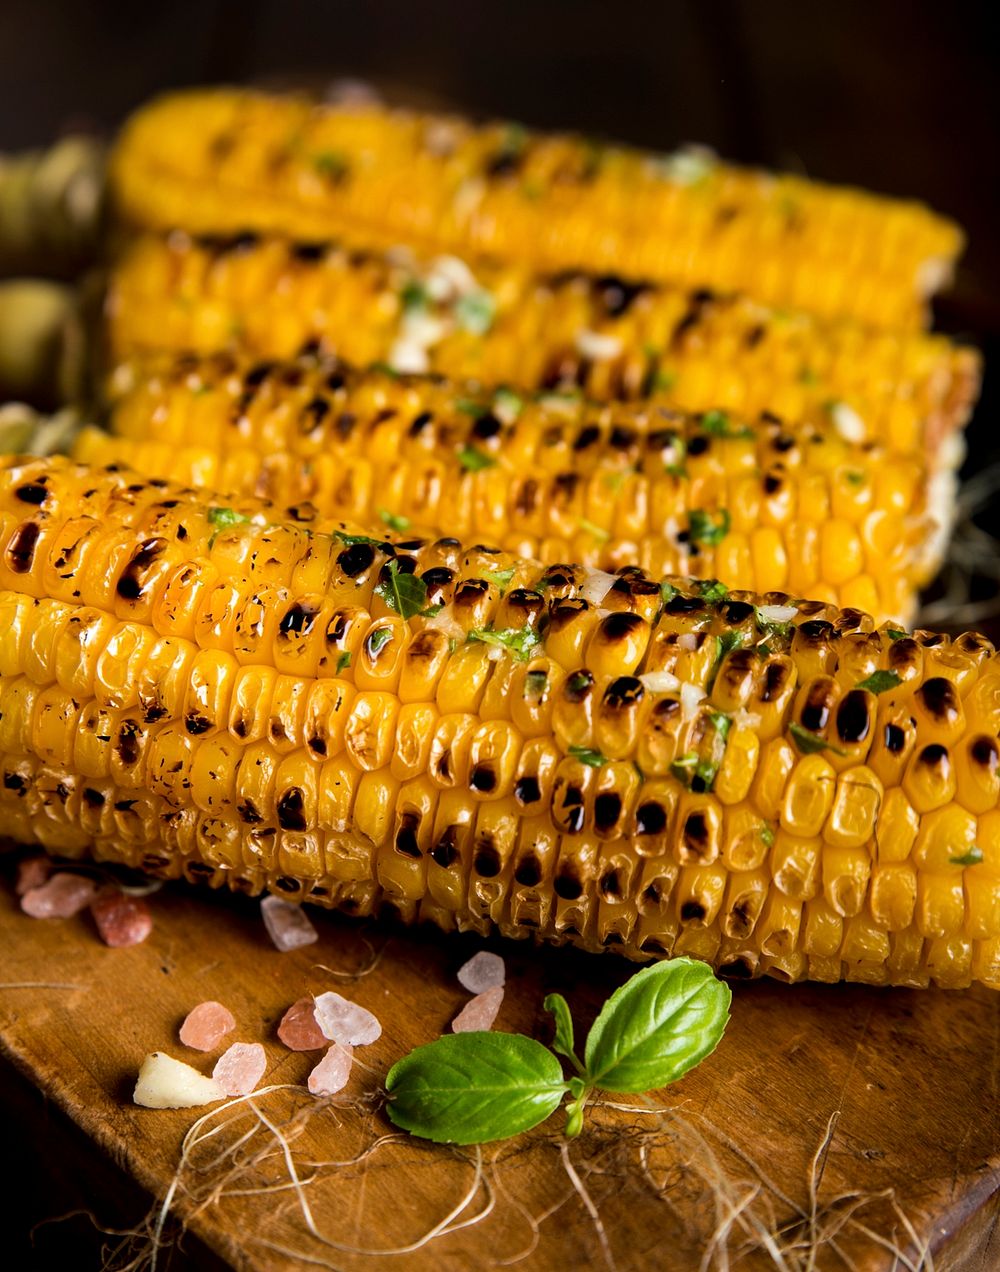 Freshly grilled corn on the cob. Original public domain image from Wikimedia Commons